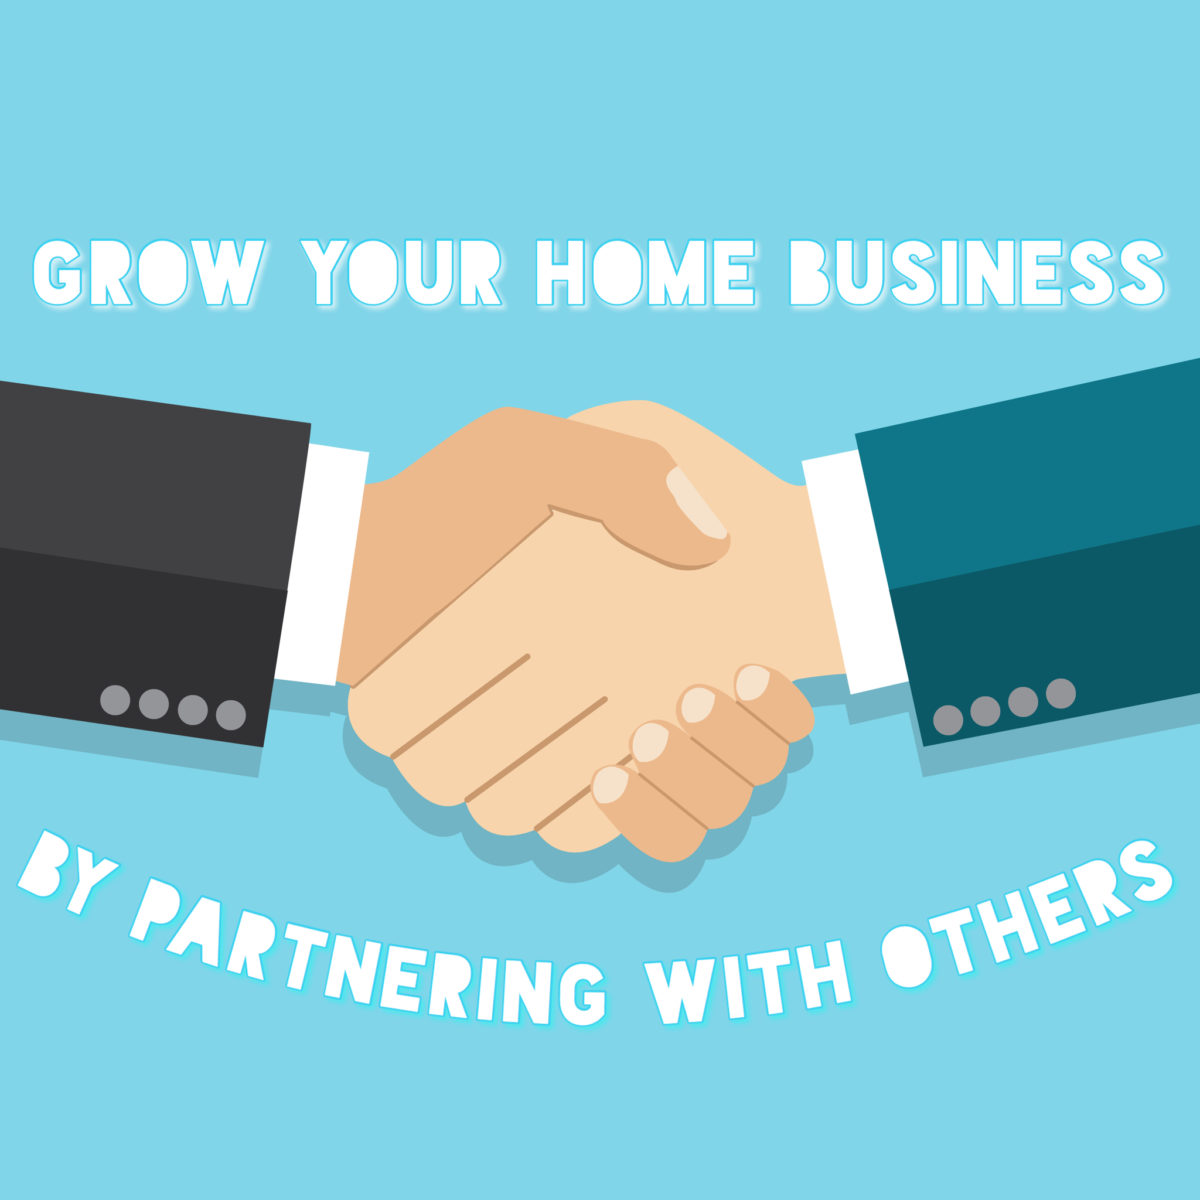 Grow Your Home Business by Partnering with Others